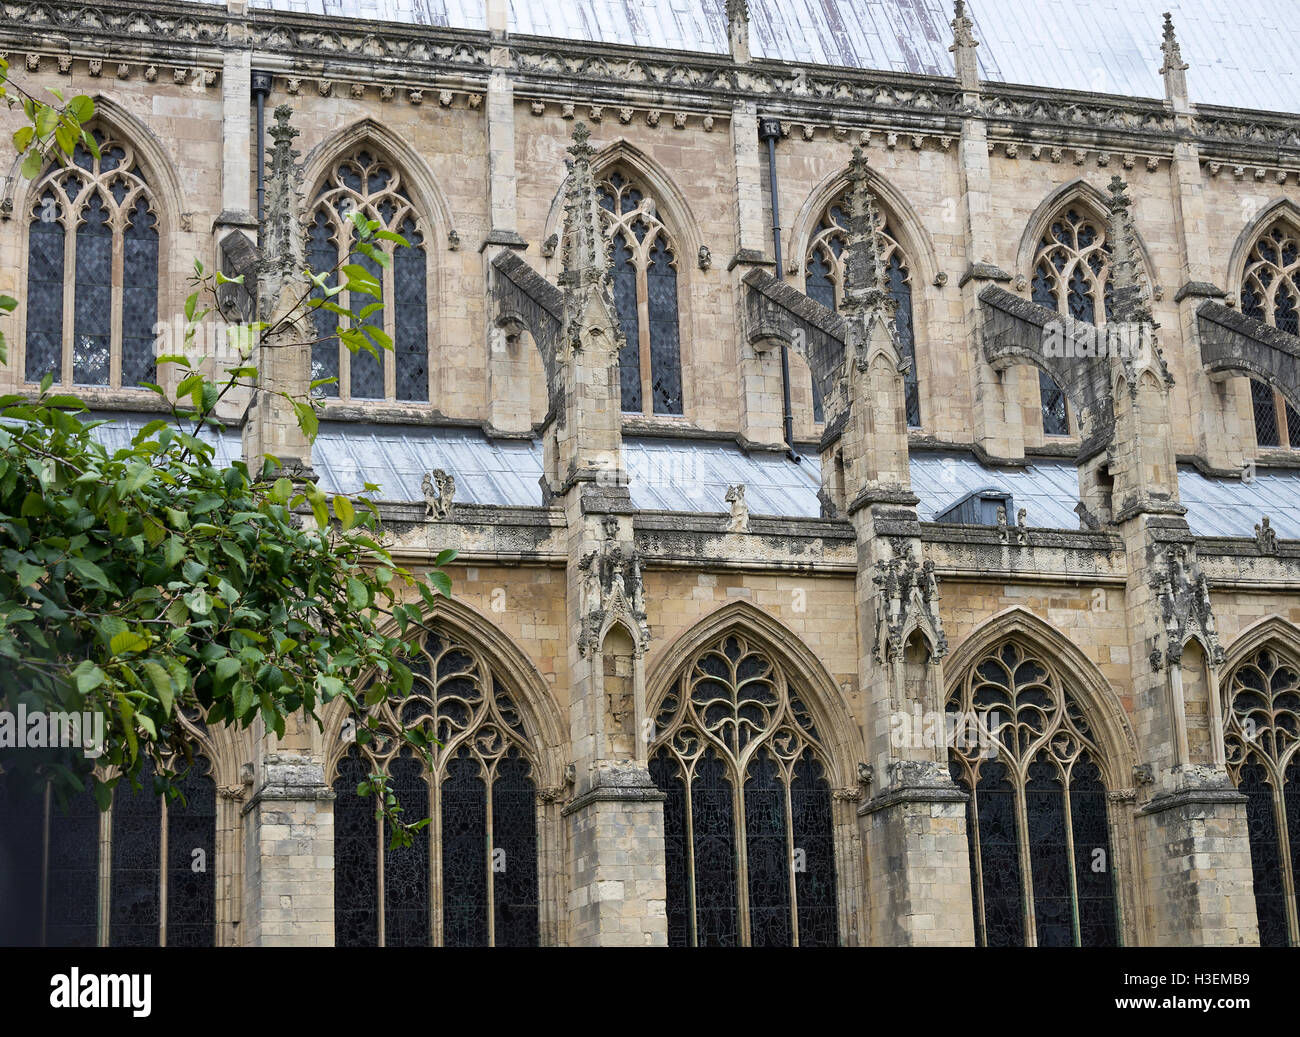 The Beautiful Perpendicular Windows with Flying Buttresses Form Part of the Beverley Minster, Beverley Yorkshire England United Kingdom UK Stock Photo